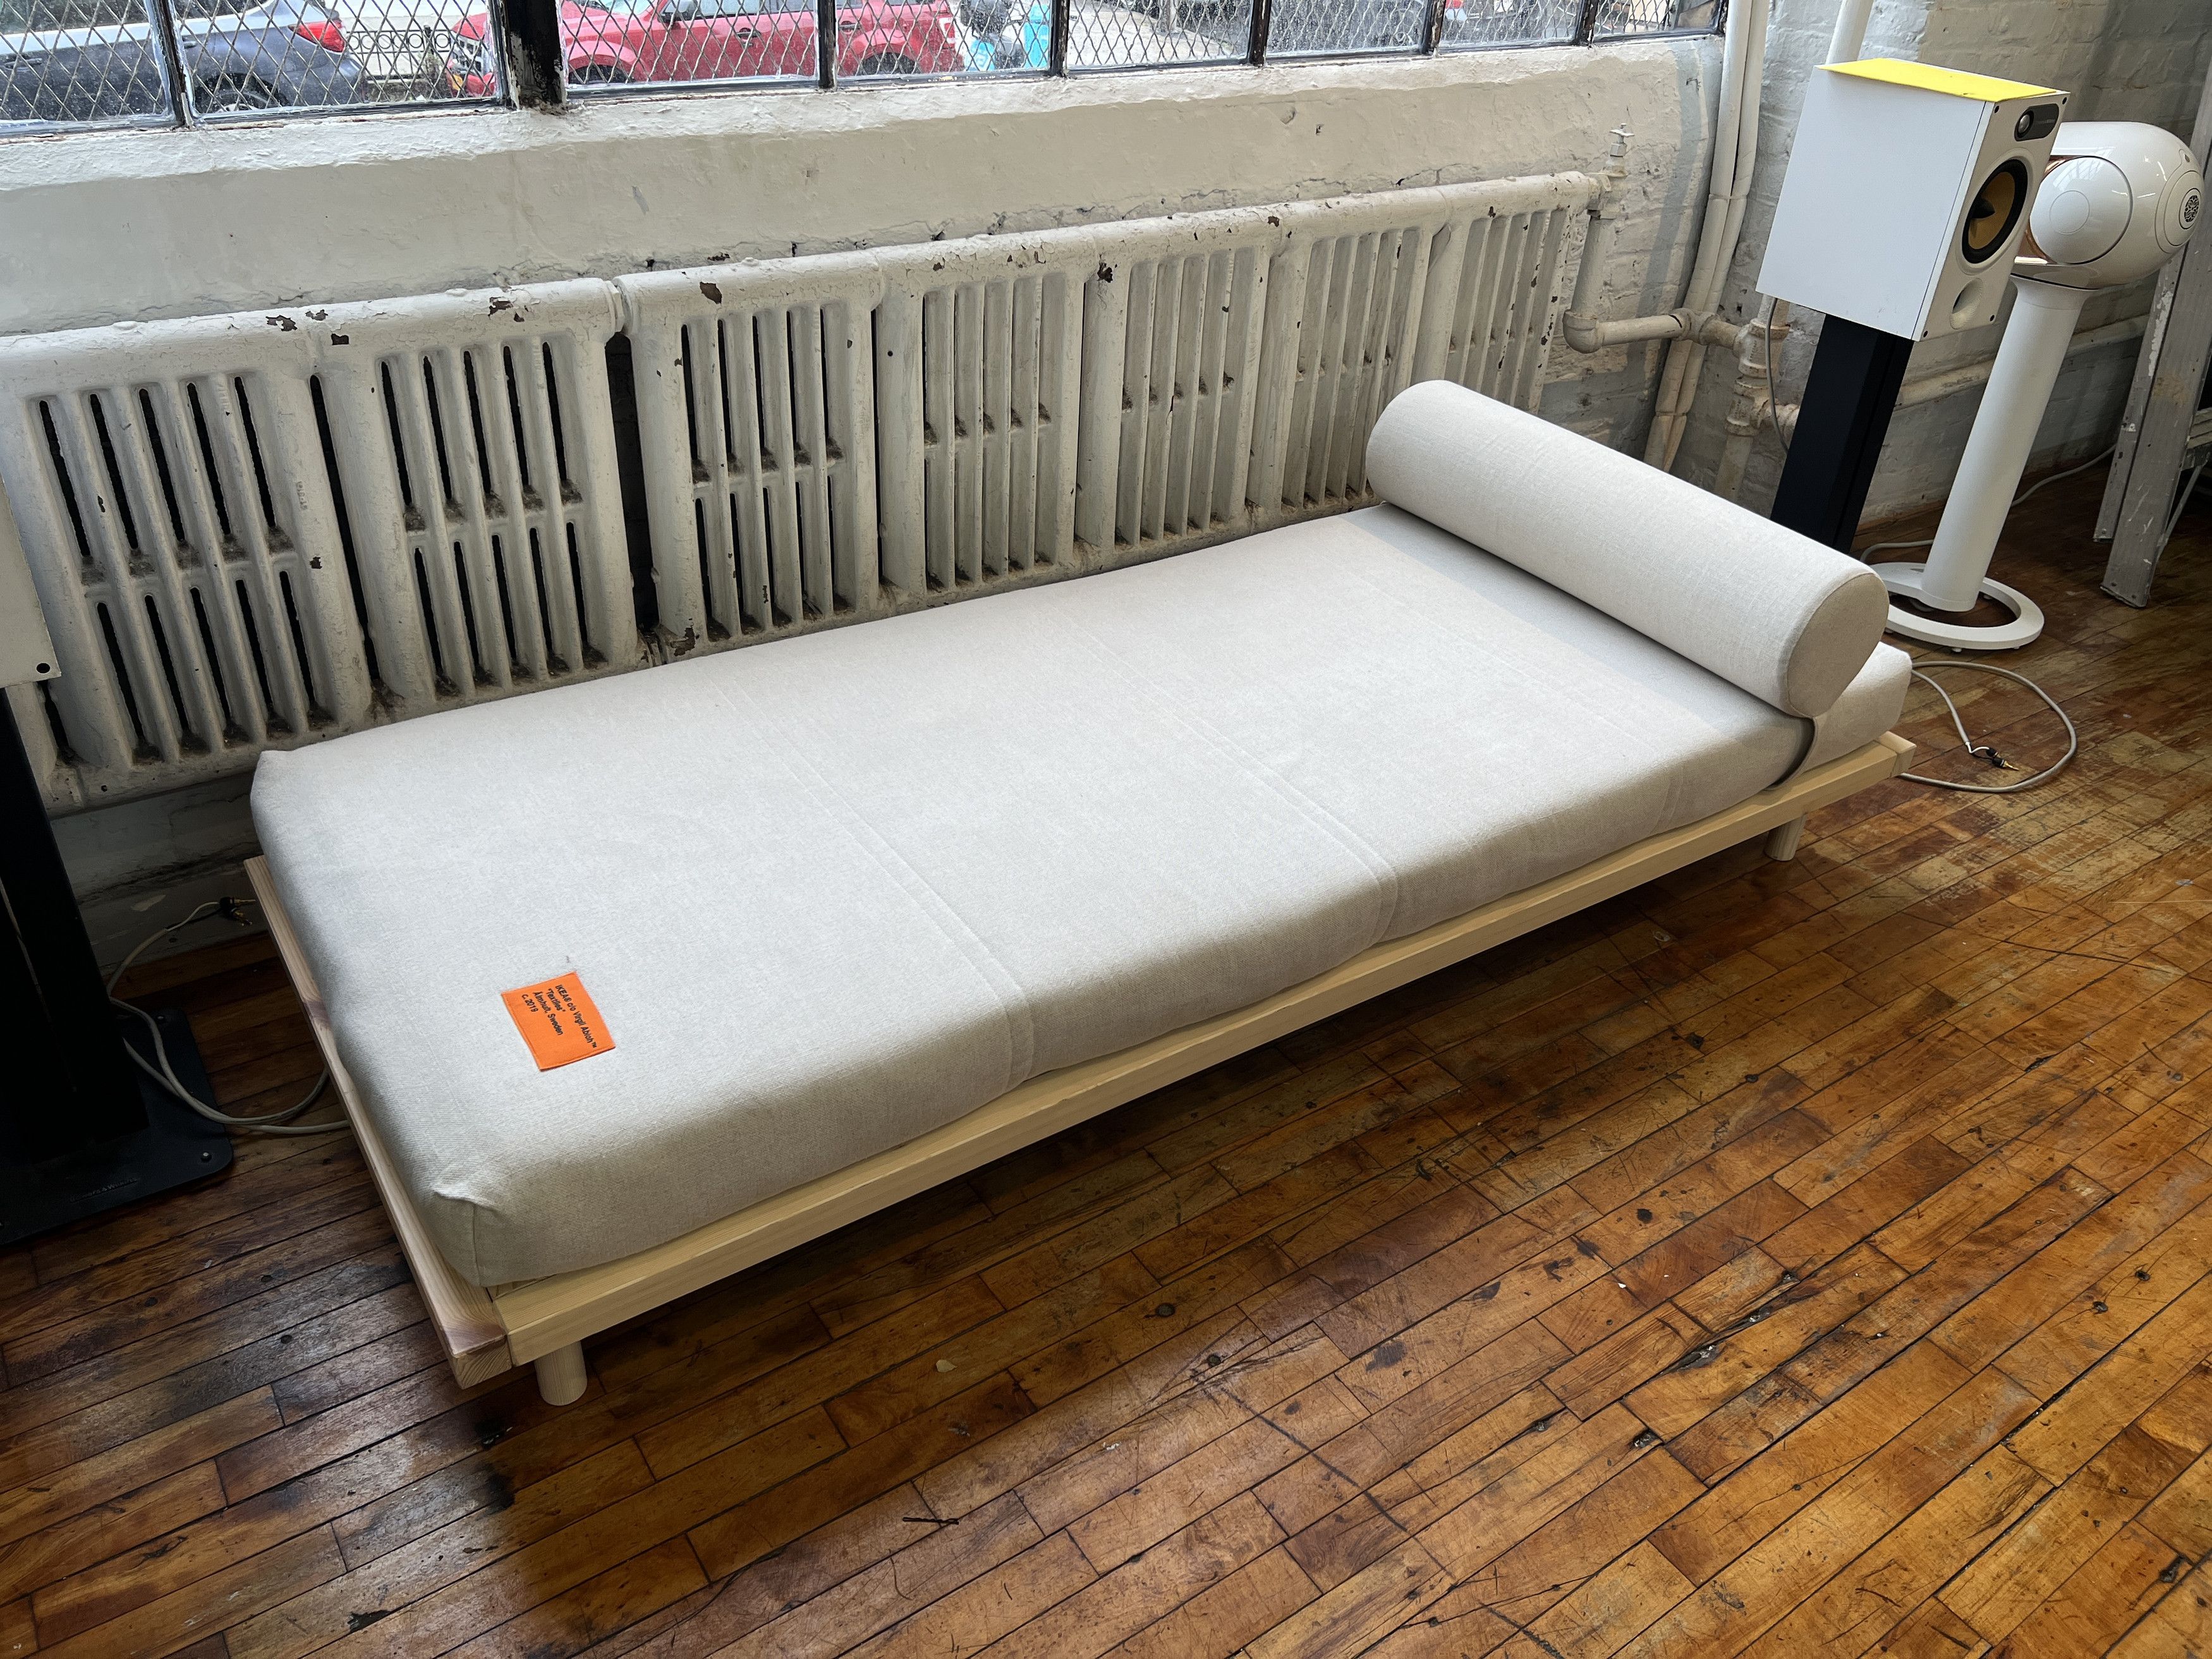 Virgil Abloh x IKEA MARKERAD DAYBED FRAME WITH EXTRA SET OF UNUSED COVERSET